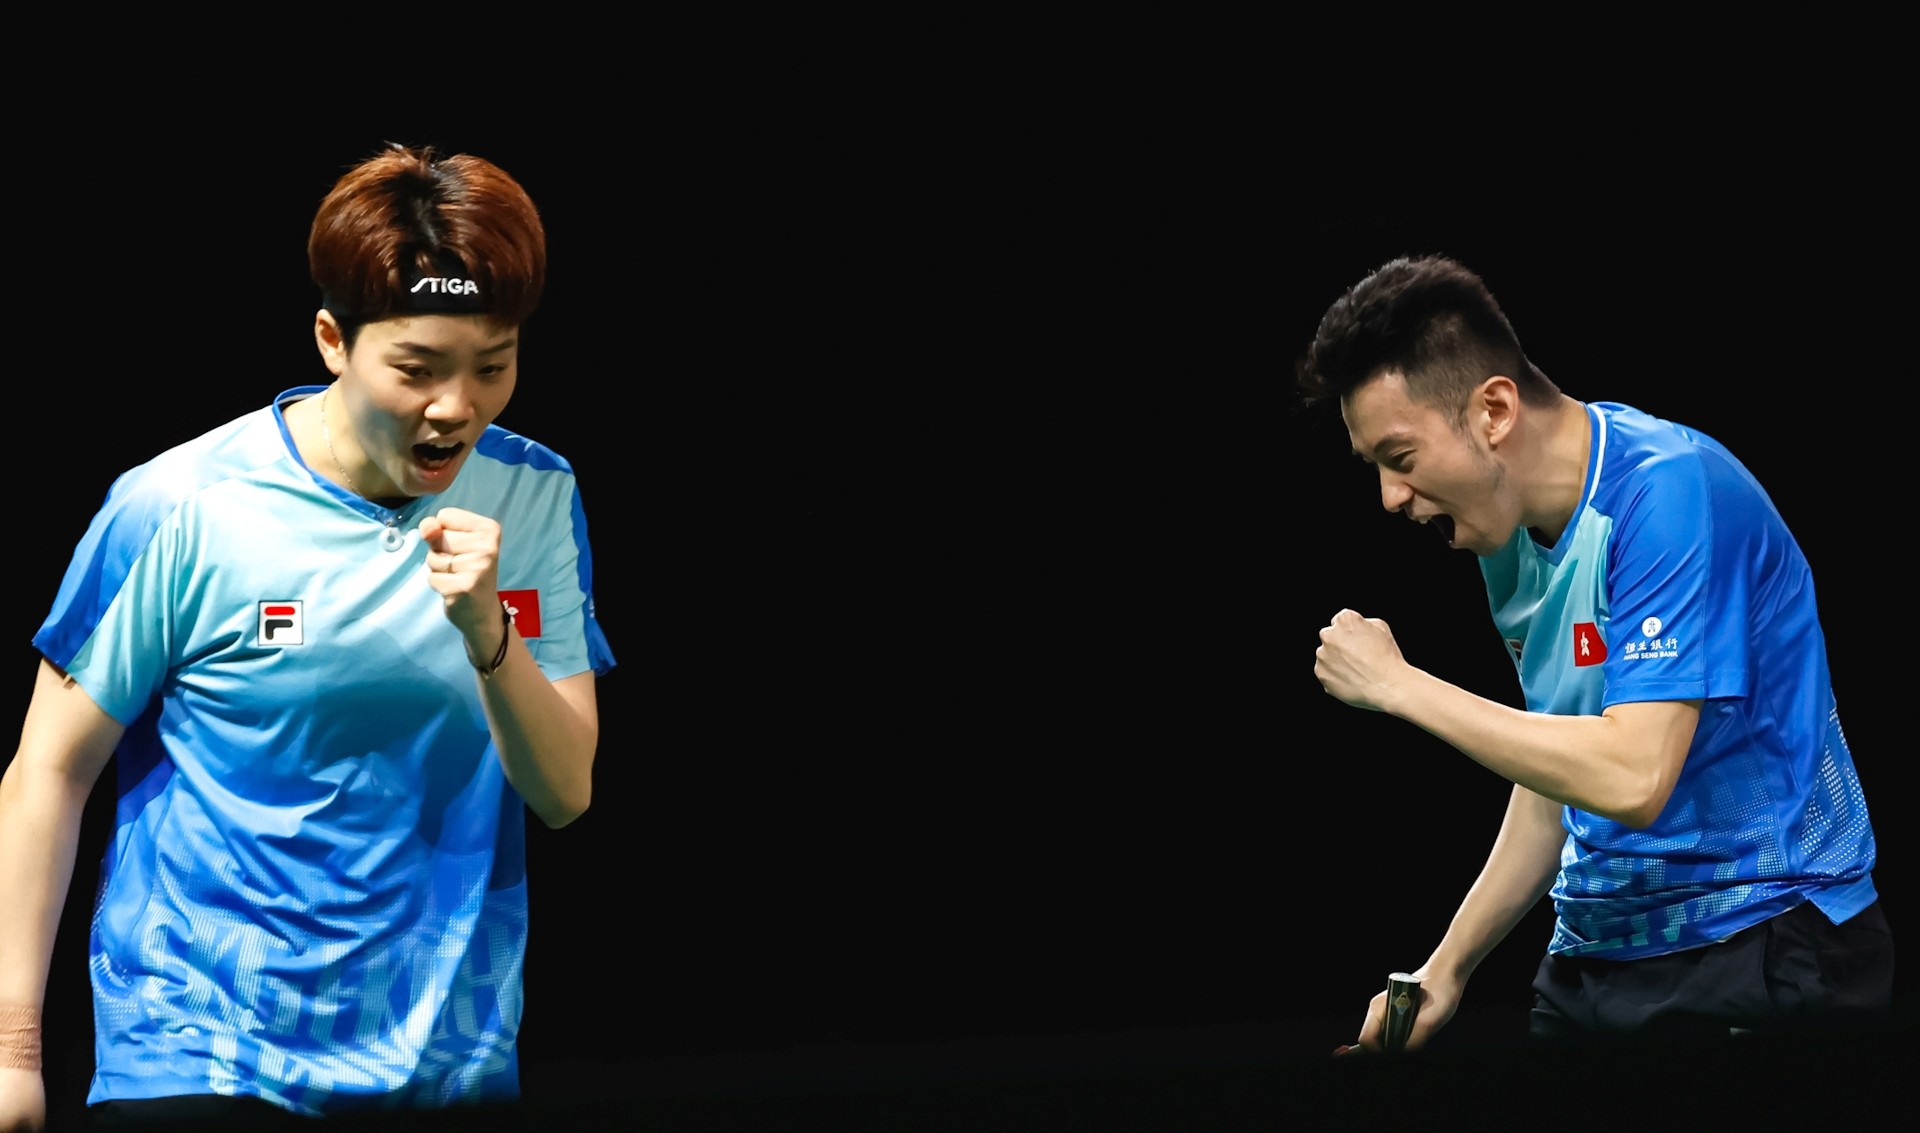 Doo Hoi-kem (left) and Wong Chun-ting clinch a place on the podium as they defeat Swedish pair Truls Moregard and Christina Kallberg. Photo: World Table Tennis